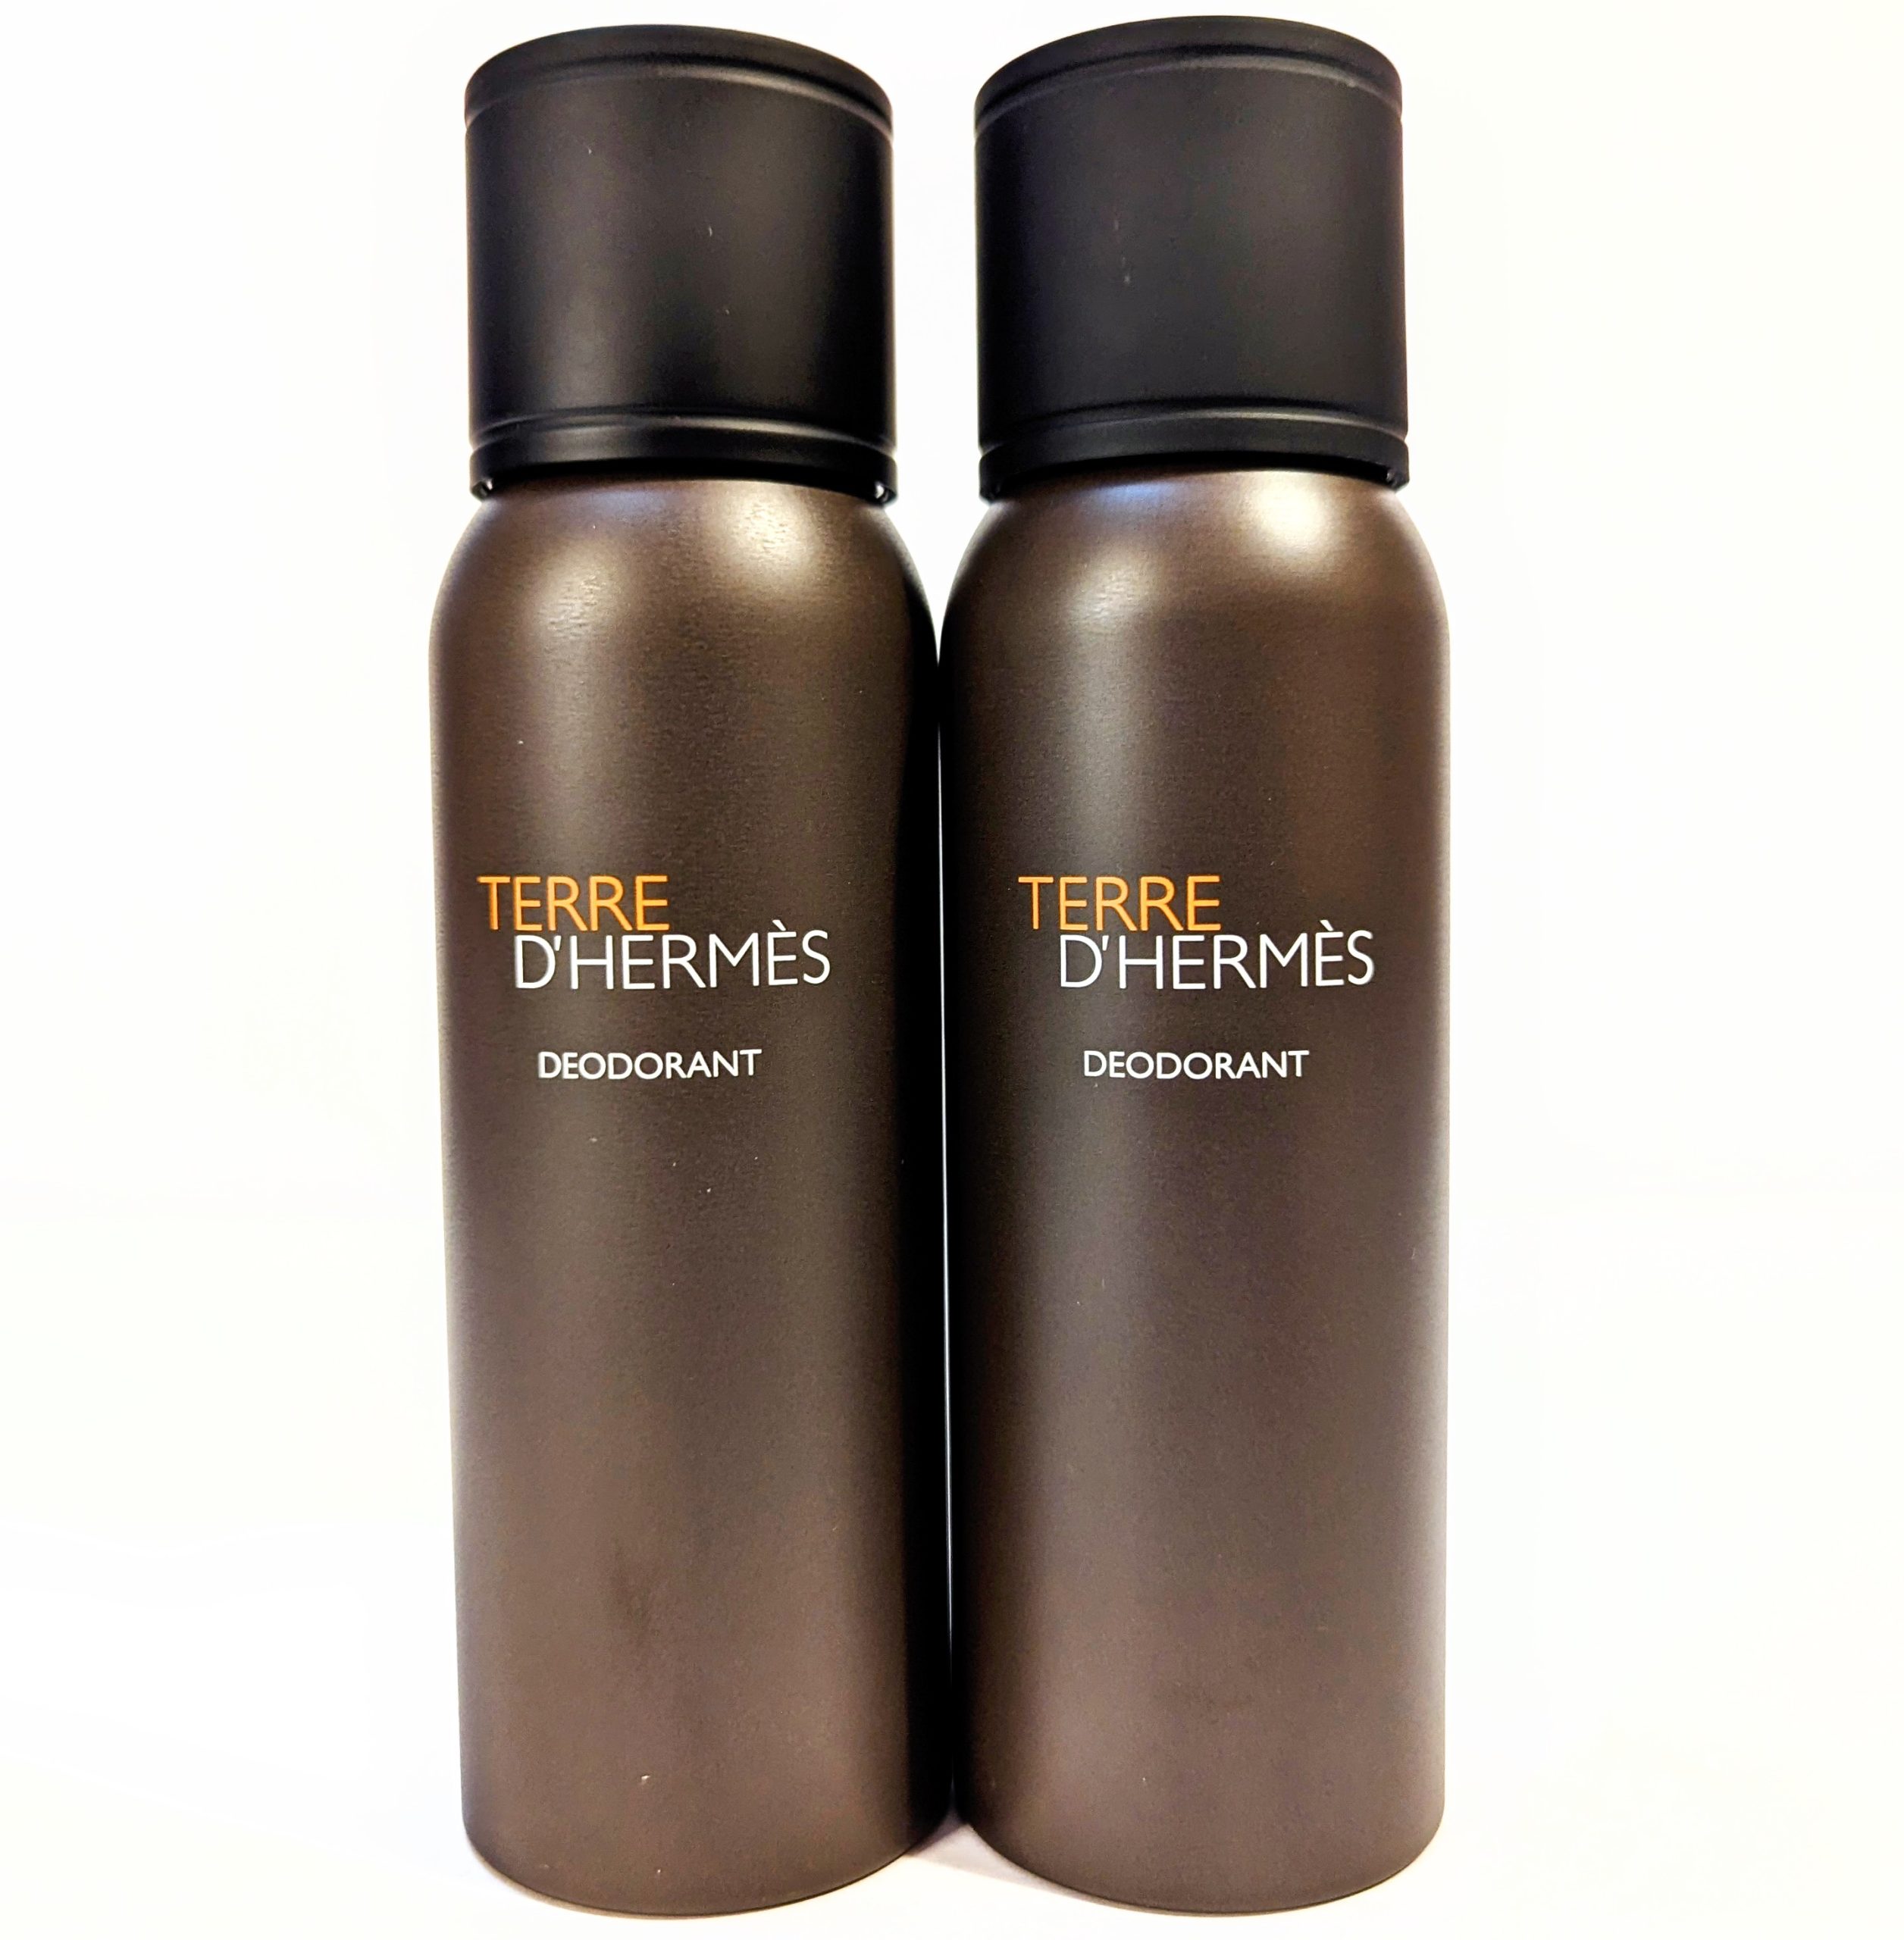 Two brown and black aerosol deodorant bottles with “Terre d’Hermès DEODORANT” written on the front.